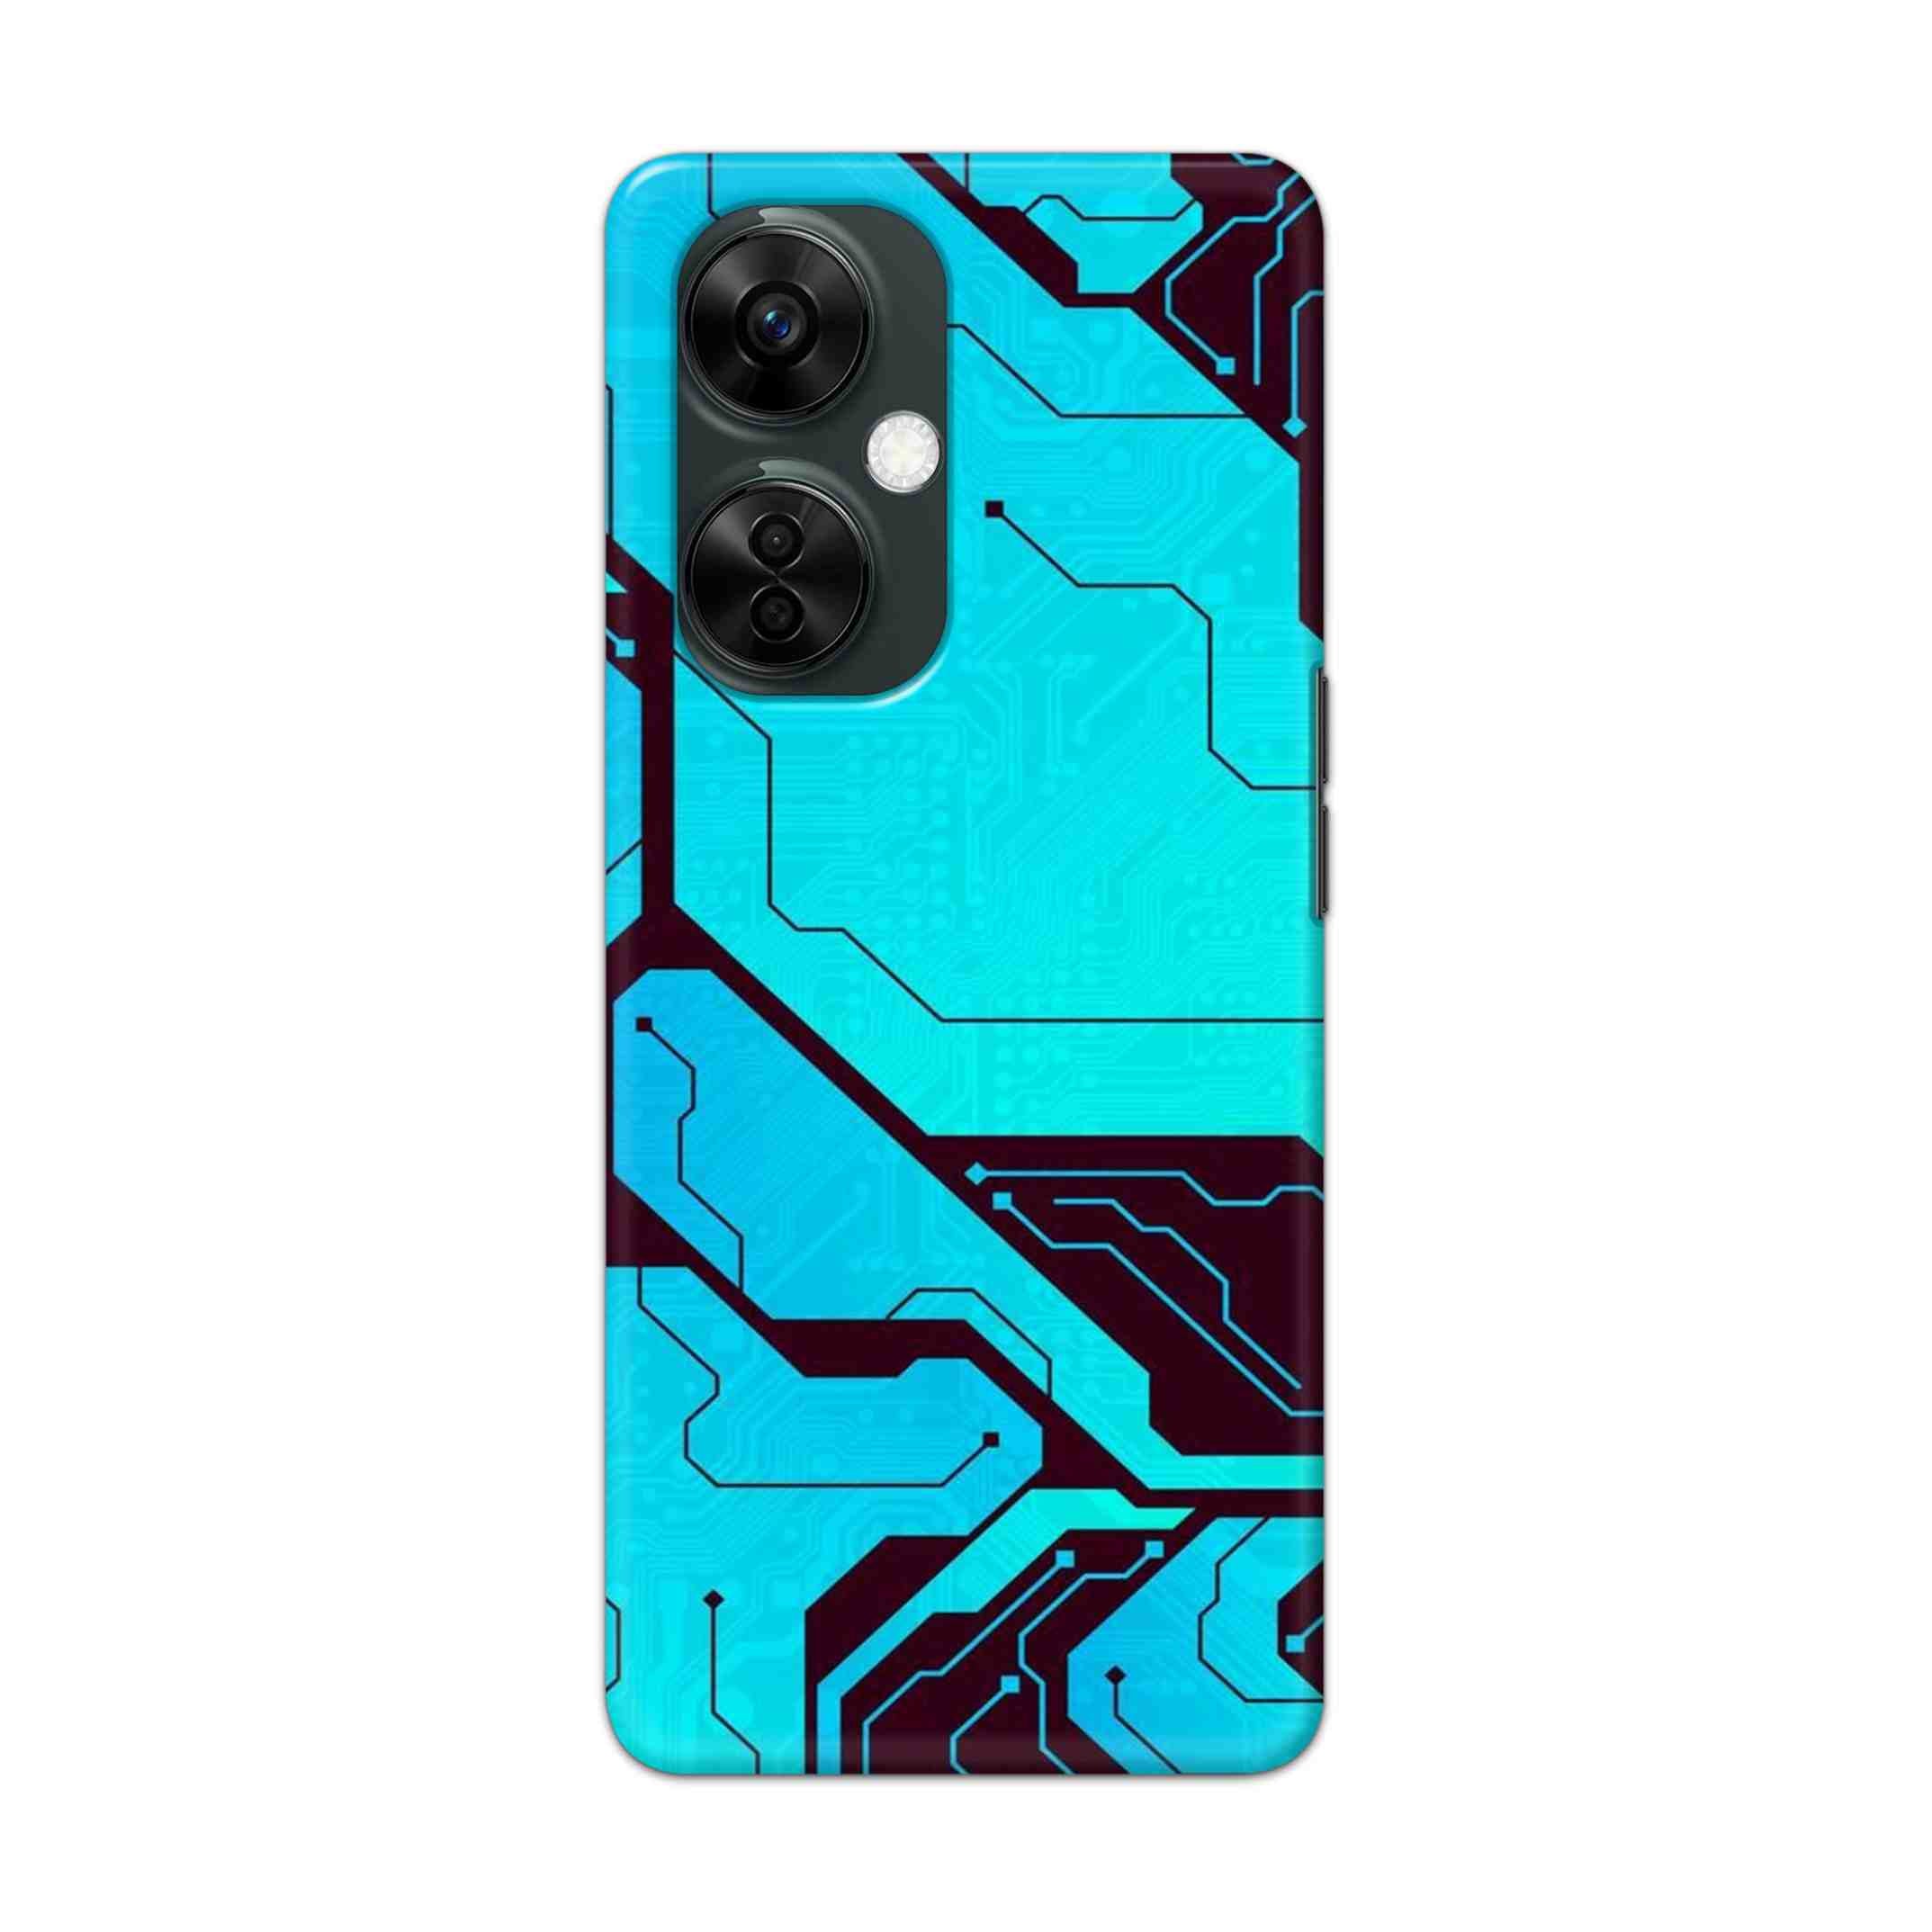 Buy Futuristic Line Hard Back Mobile Phone Case Cover For Oneplus Nord CE 3 Lite Online